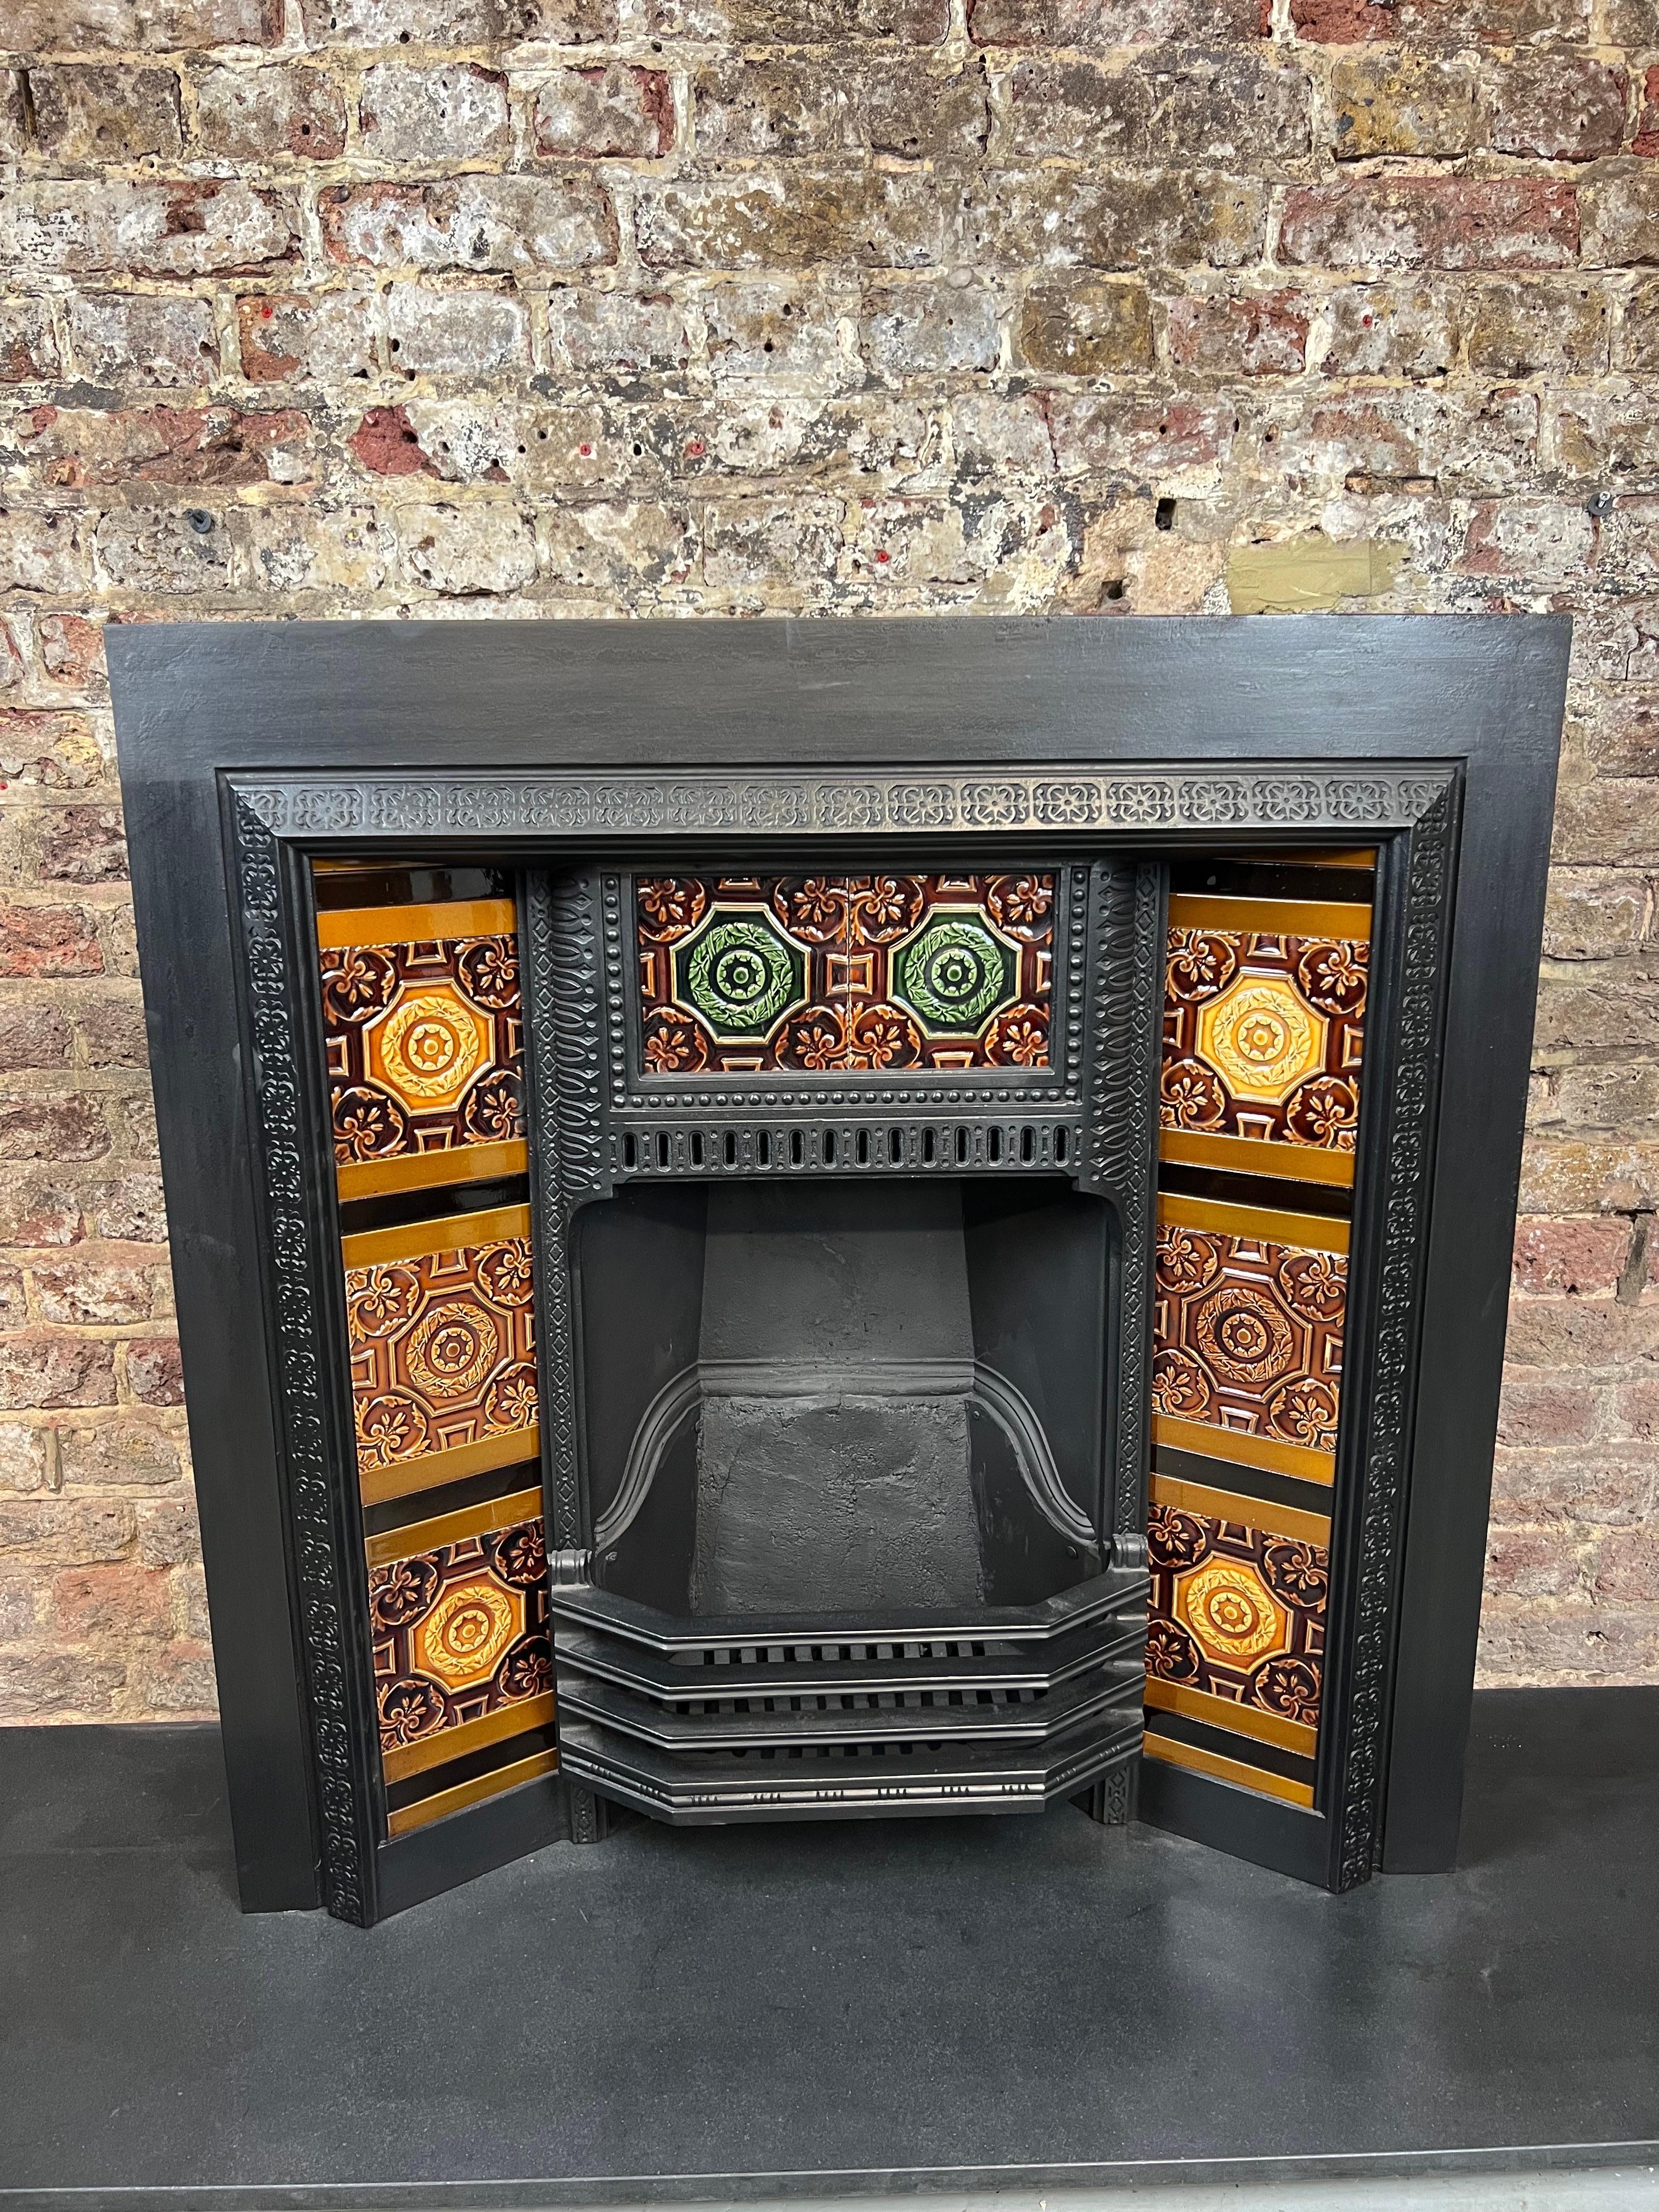 19th Century Tiled Cast-iron Fireplace Insert.
A Classic Example Of A Very Fine Victorian & English Made Cast-iron Fireplace With Its Original English Made Tiles. (Standard Set of Ten).
This Fireplace Was Recently Salvaged From A Large London Town